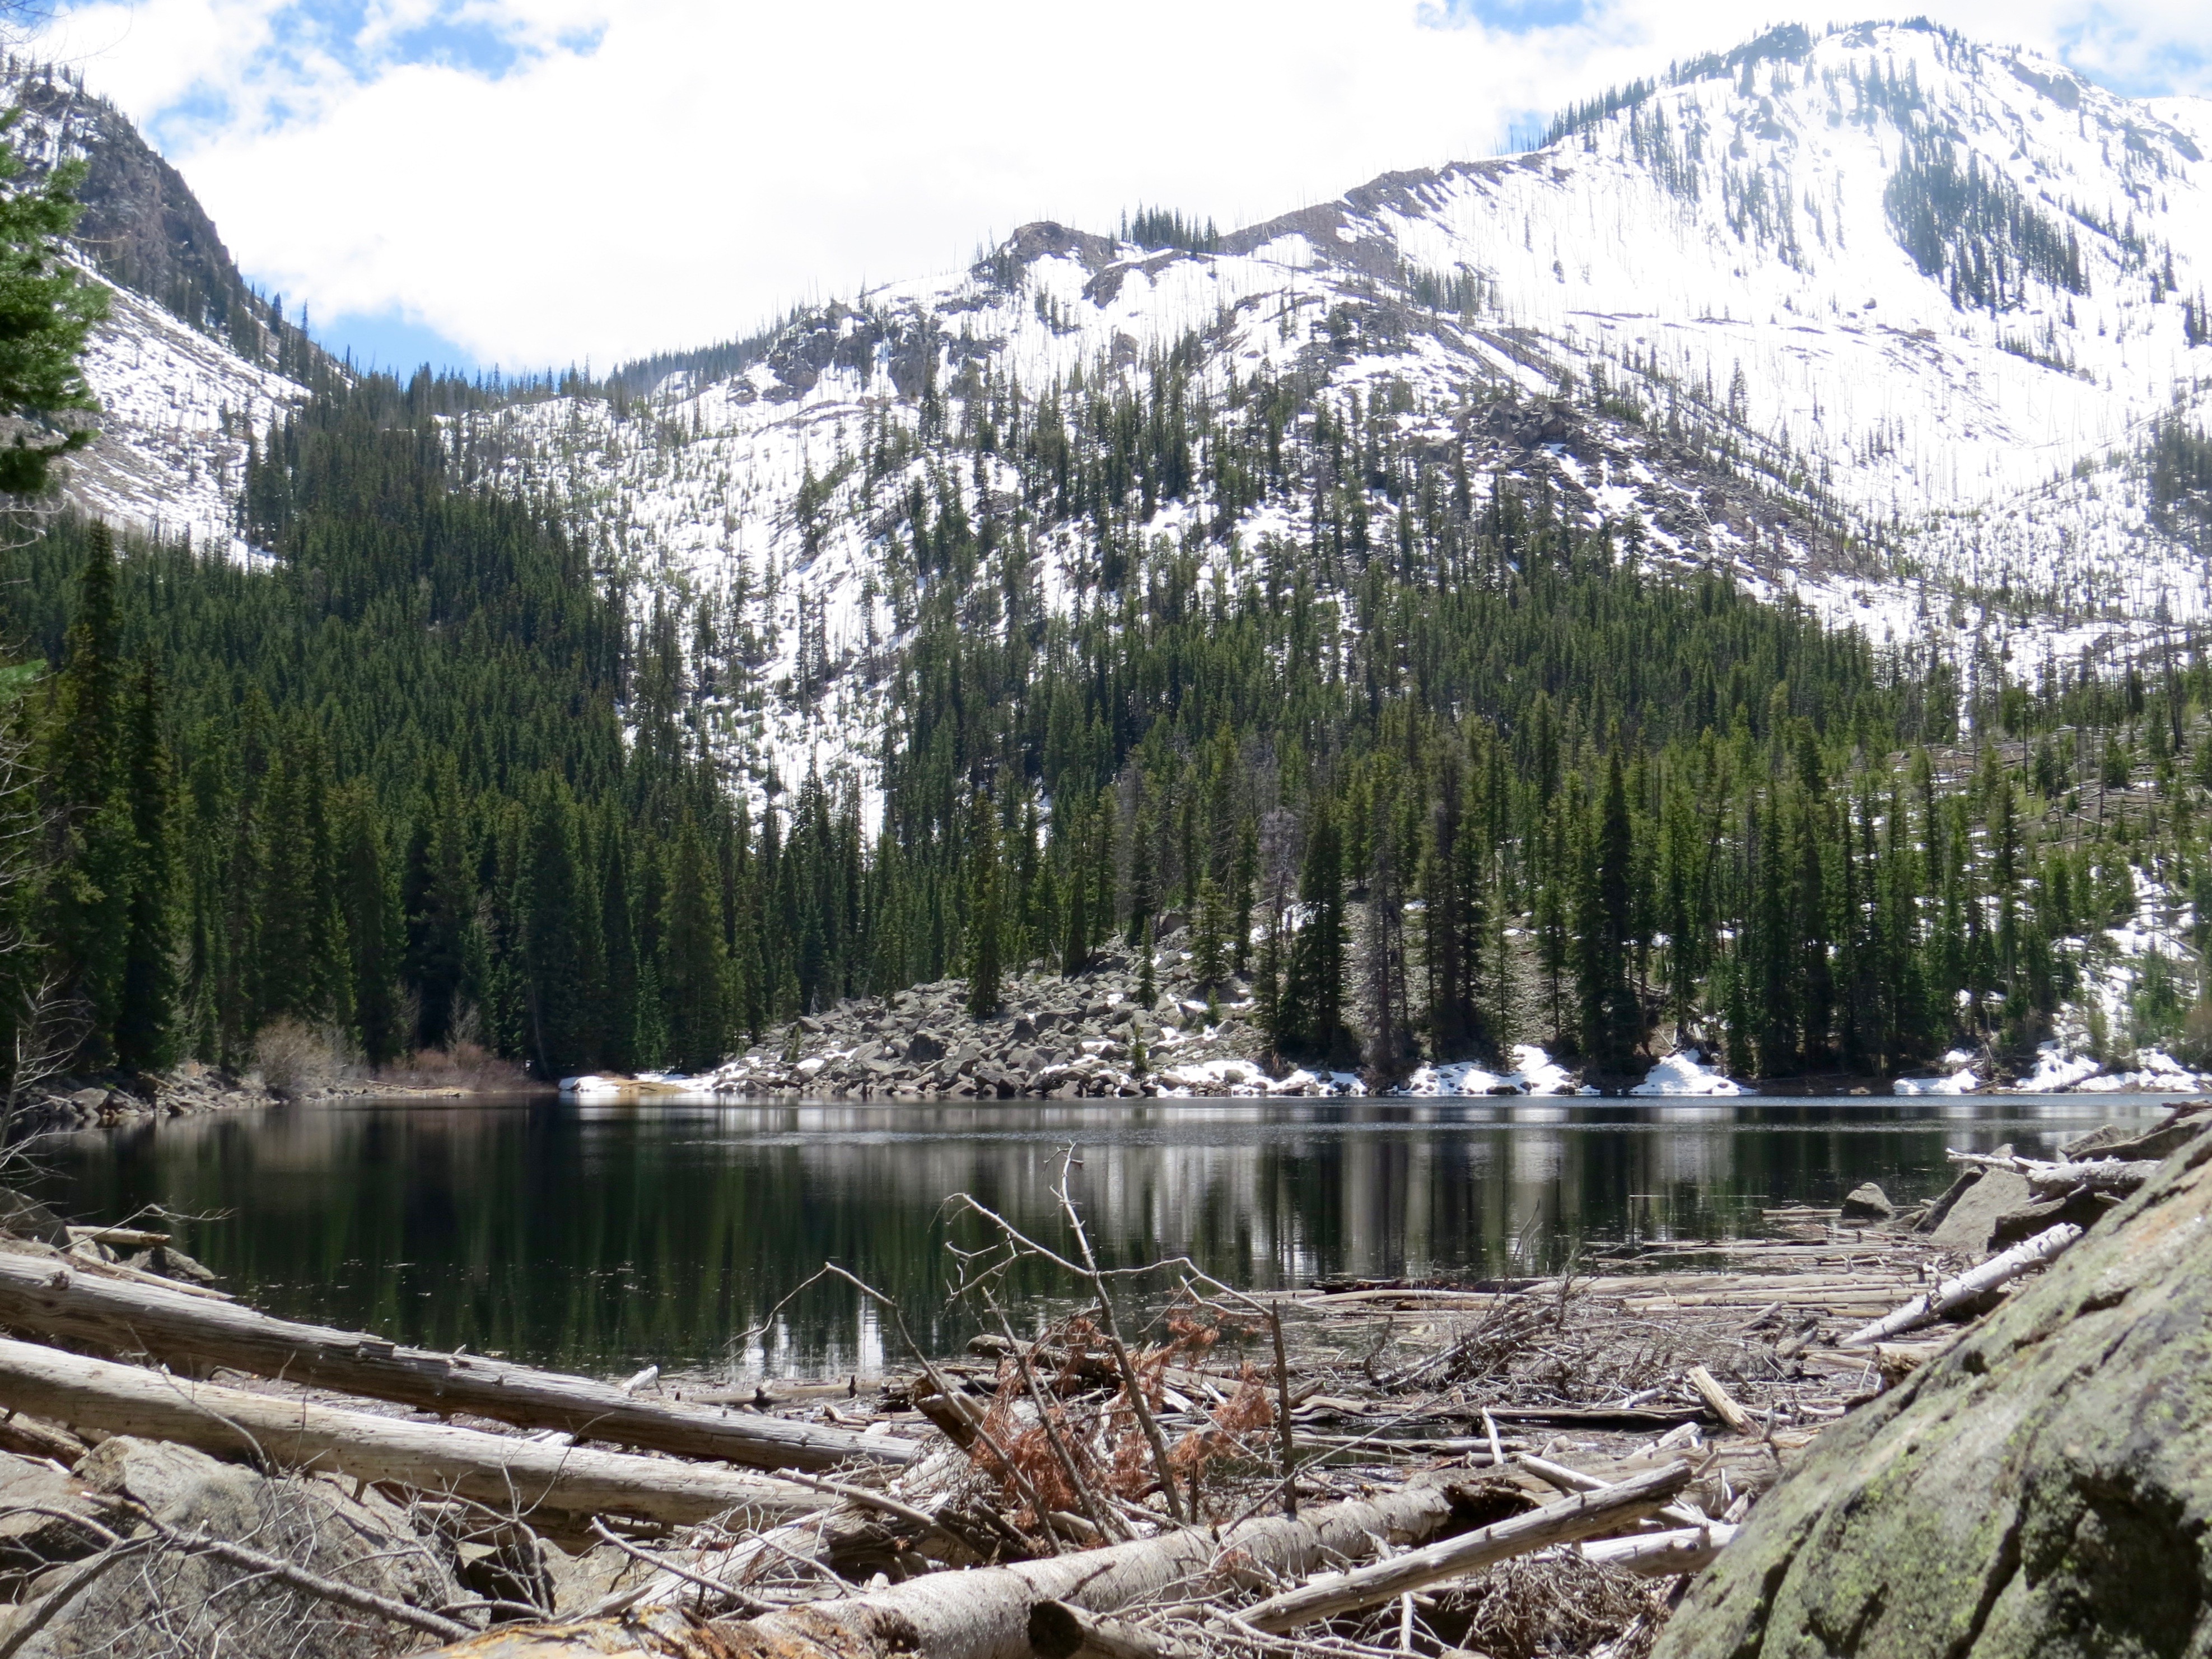 I EXPERIENCED MY OWN MEMORABLE ADVENTURE THIS WEEK ON MY FIRST VOLUNTEER USFS RANGER DUTY.  I HIKED THROUGH SNOW AND FALLEN TREES BUT FINALLY REACHED BEAUTIFUL WELLER LAKE.  